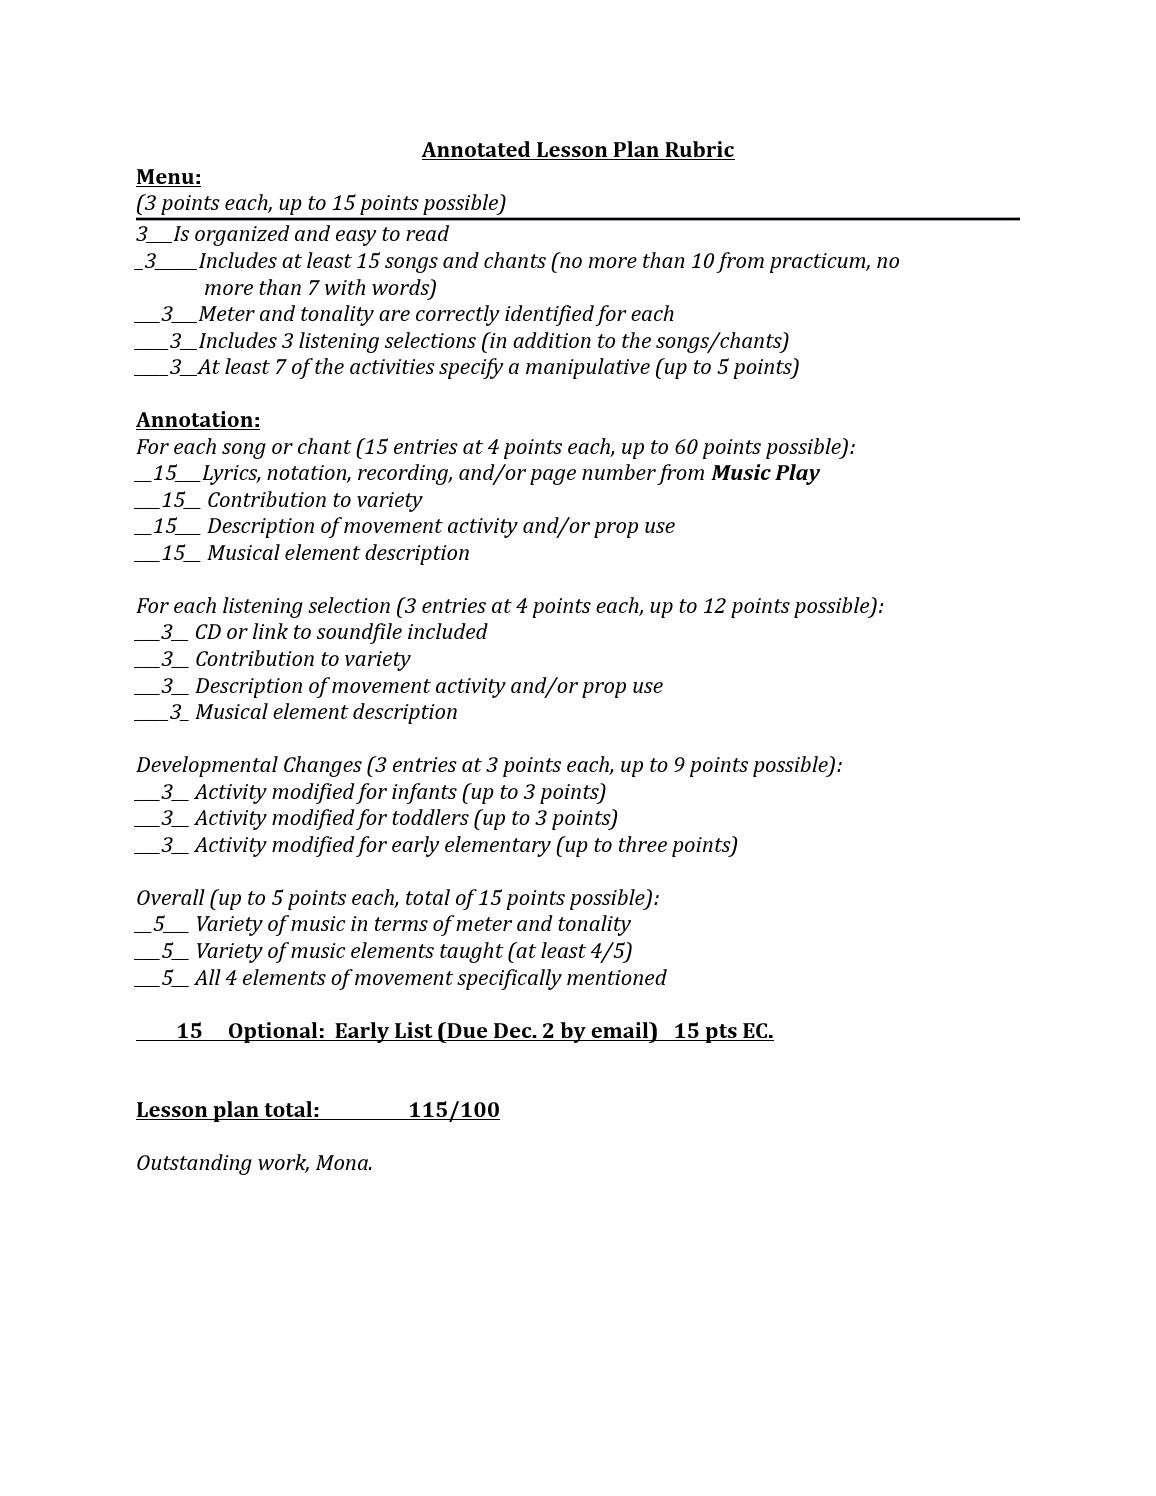 Annotated Lesson Plan Sample Annotated Lesson Plan with Rubric by Karen Salvador